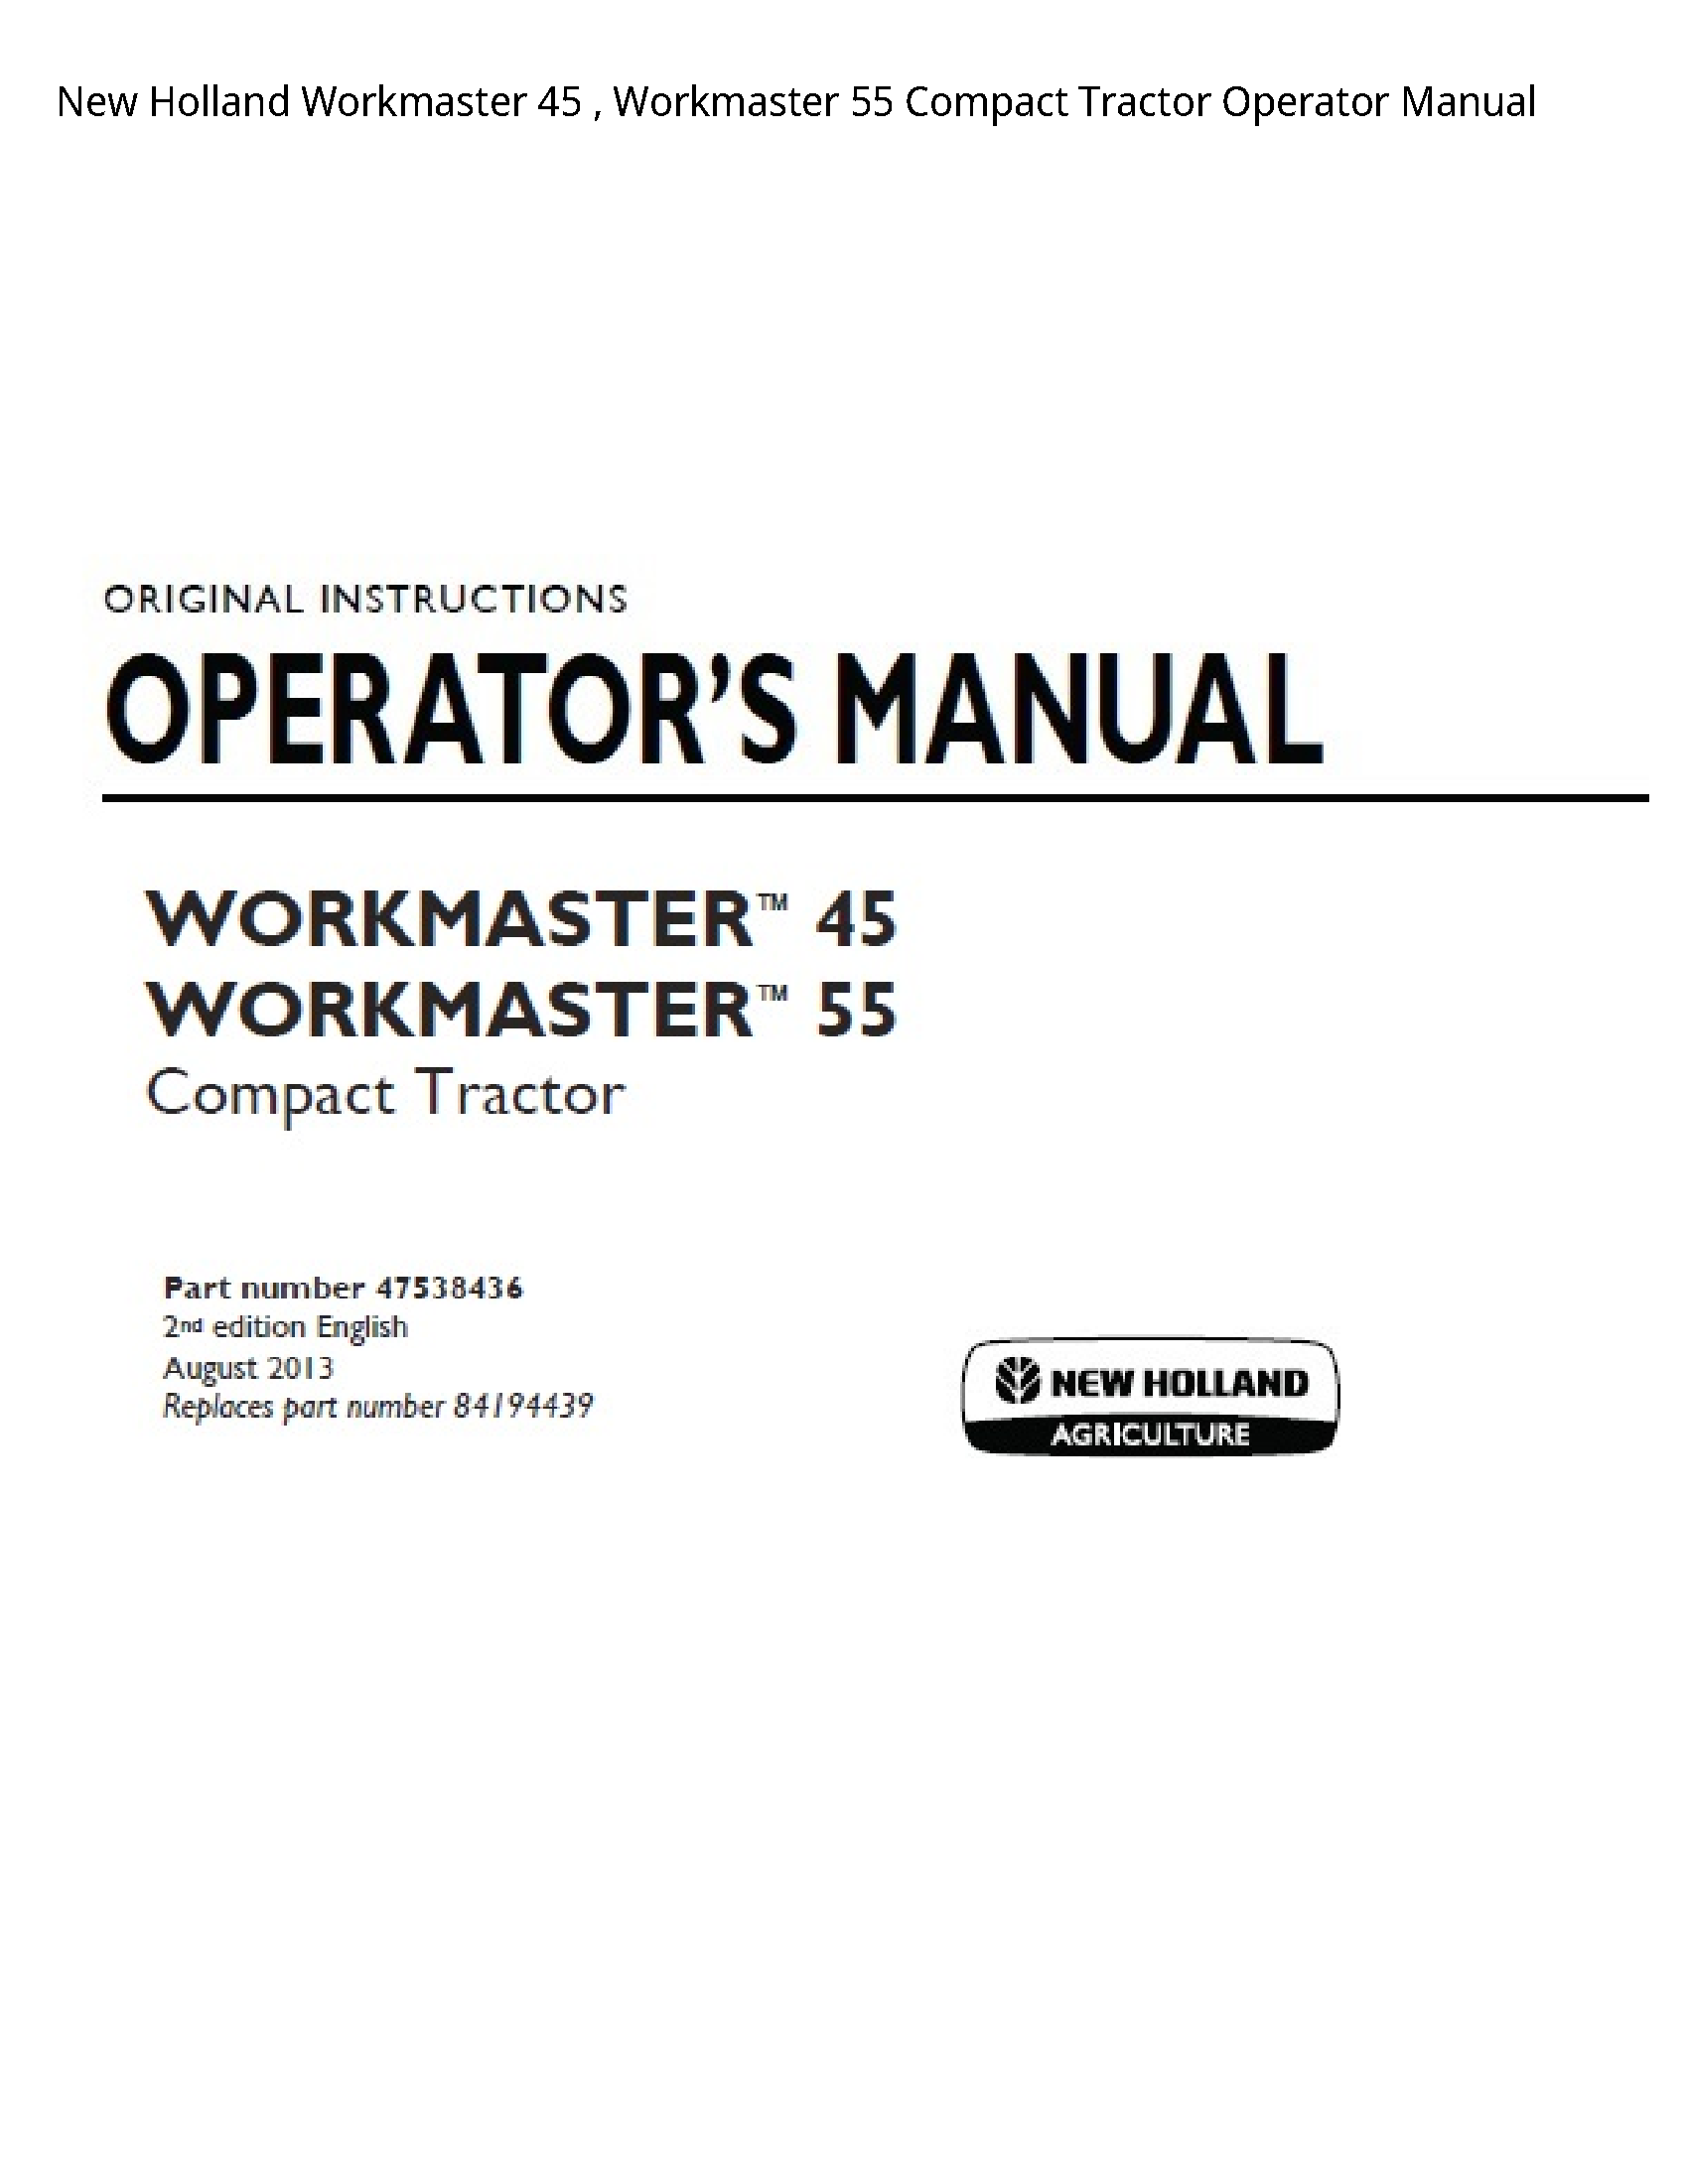 New Holland 45 Workmaster Workmaster Compact Tractor Operator manual